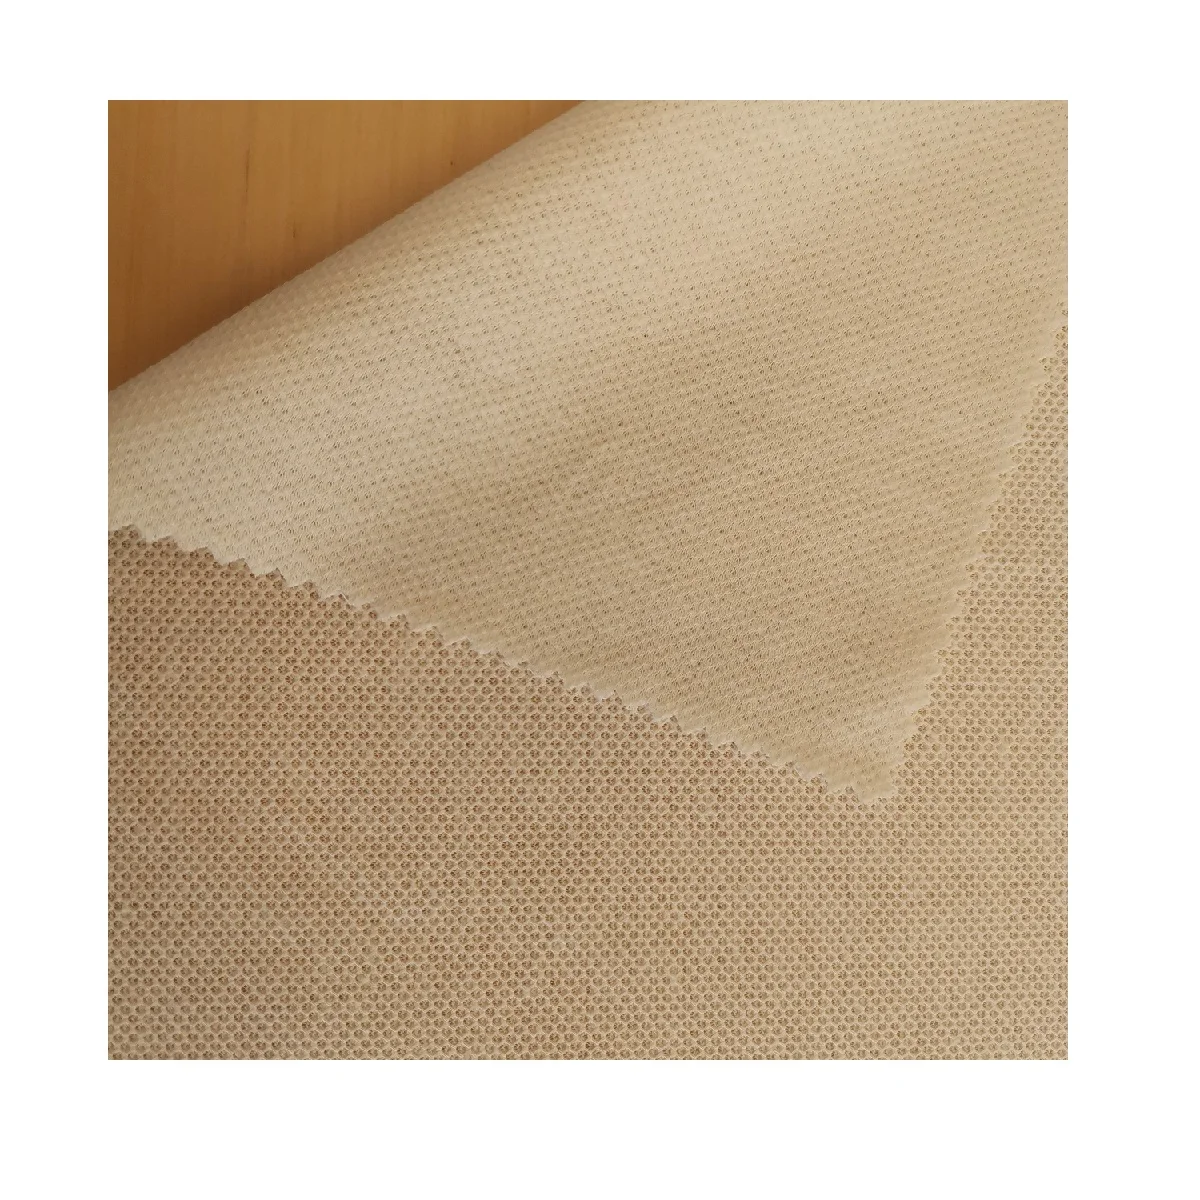 Organic Sustainable 50% Hemp50%cotton Eco-friendly Breathable for white bead mesh fabric